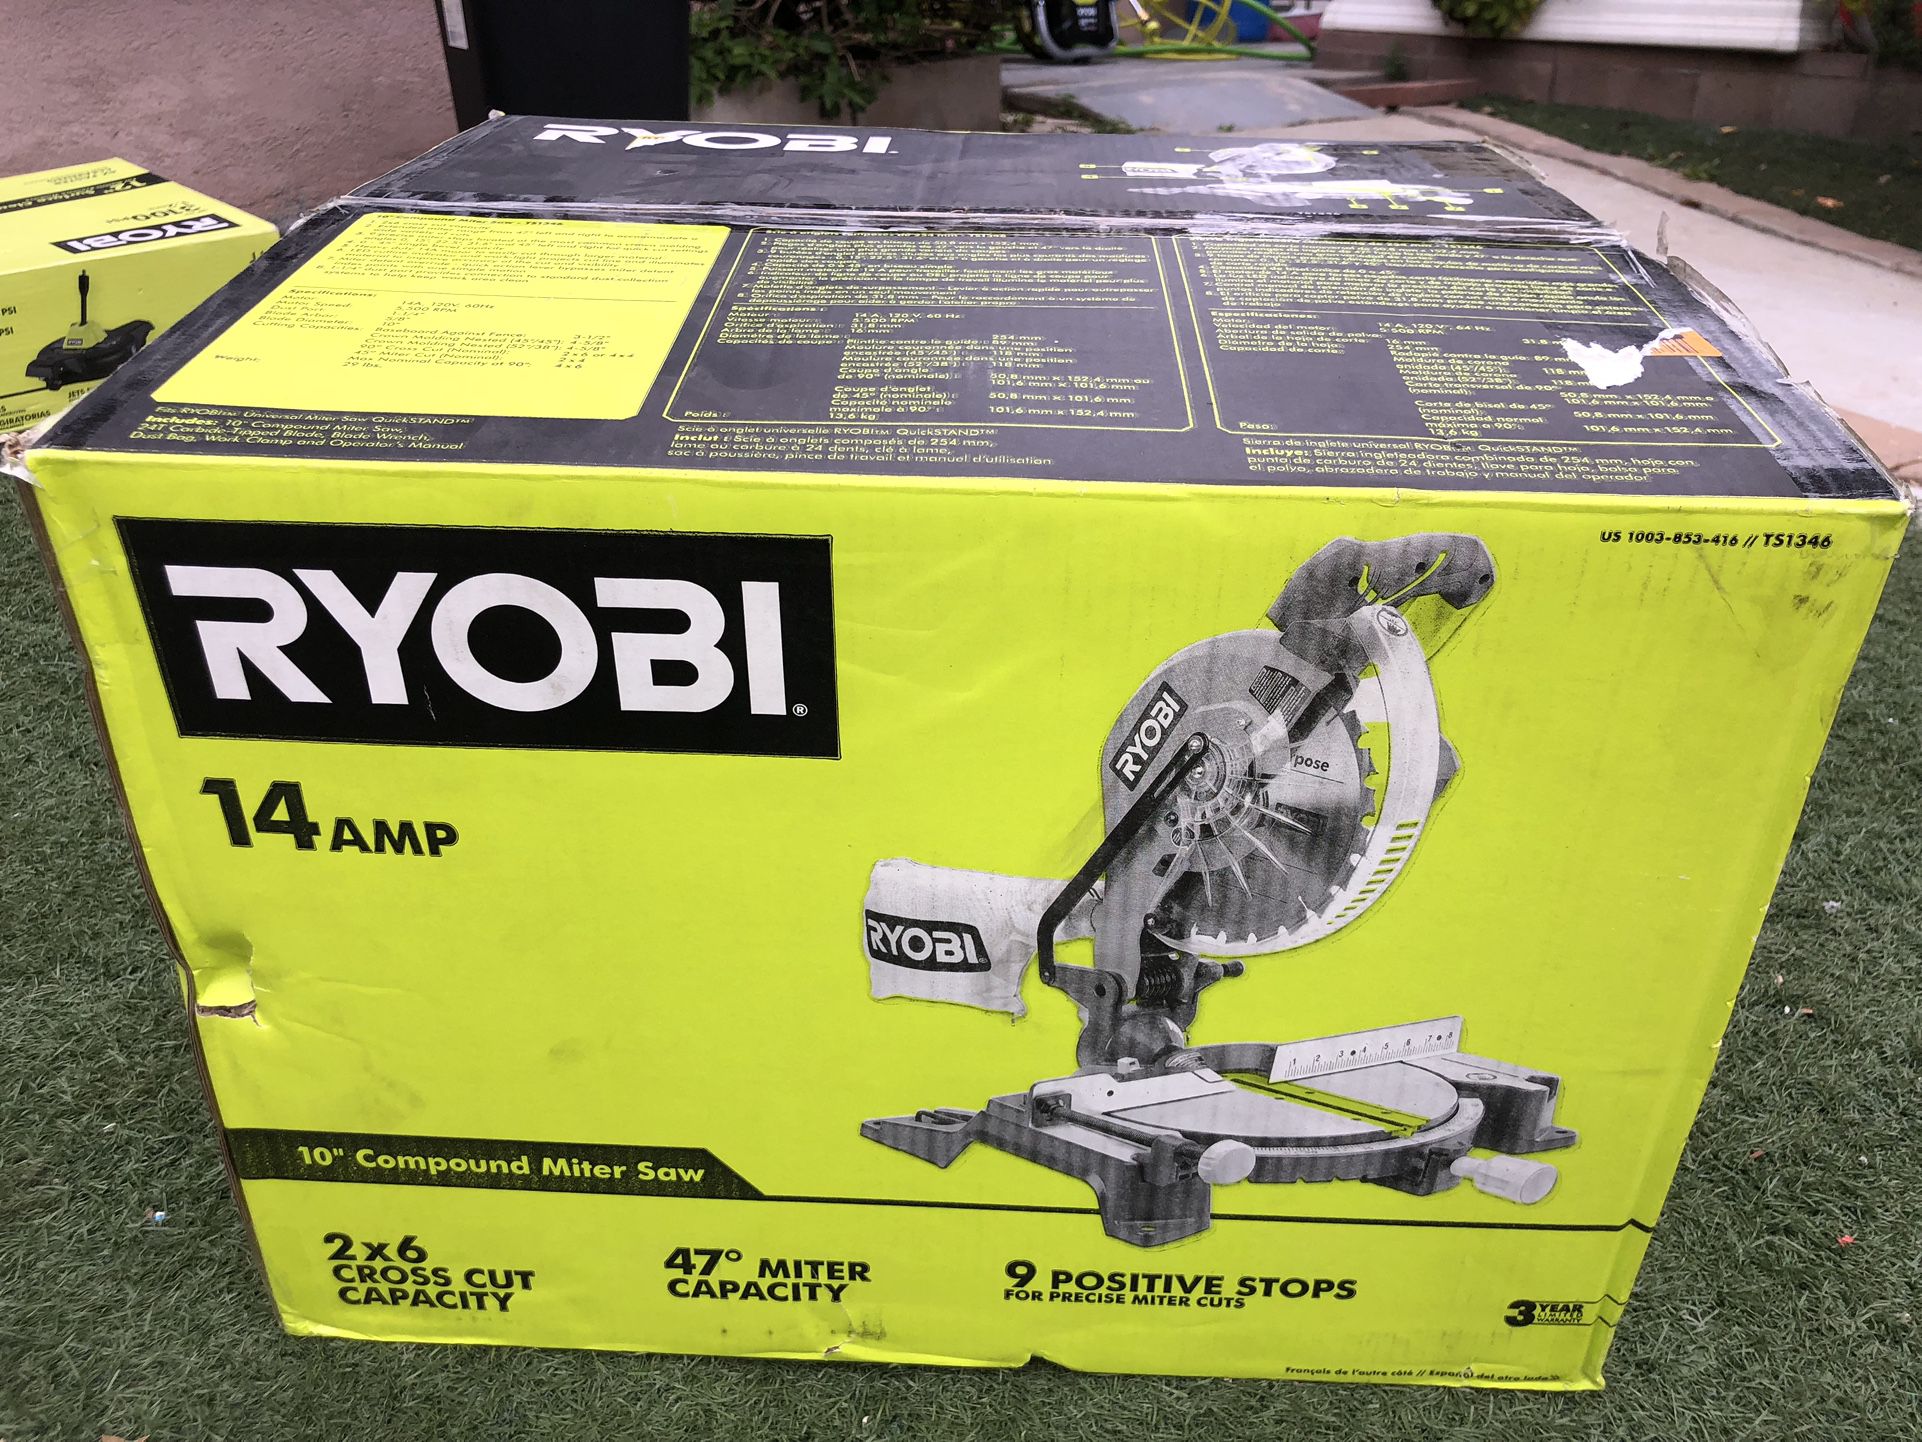 RYOBI 14 Amp Corded 10 in. Compound Miter Saw with LED Cutline Indicator $100 